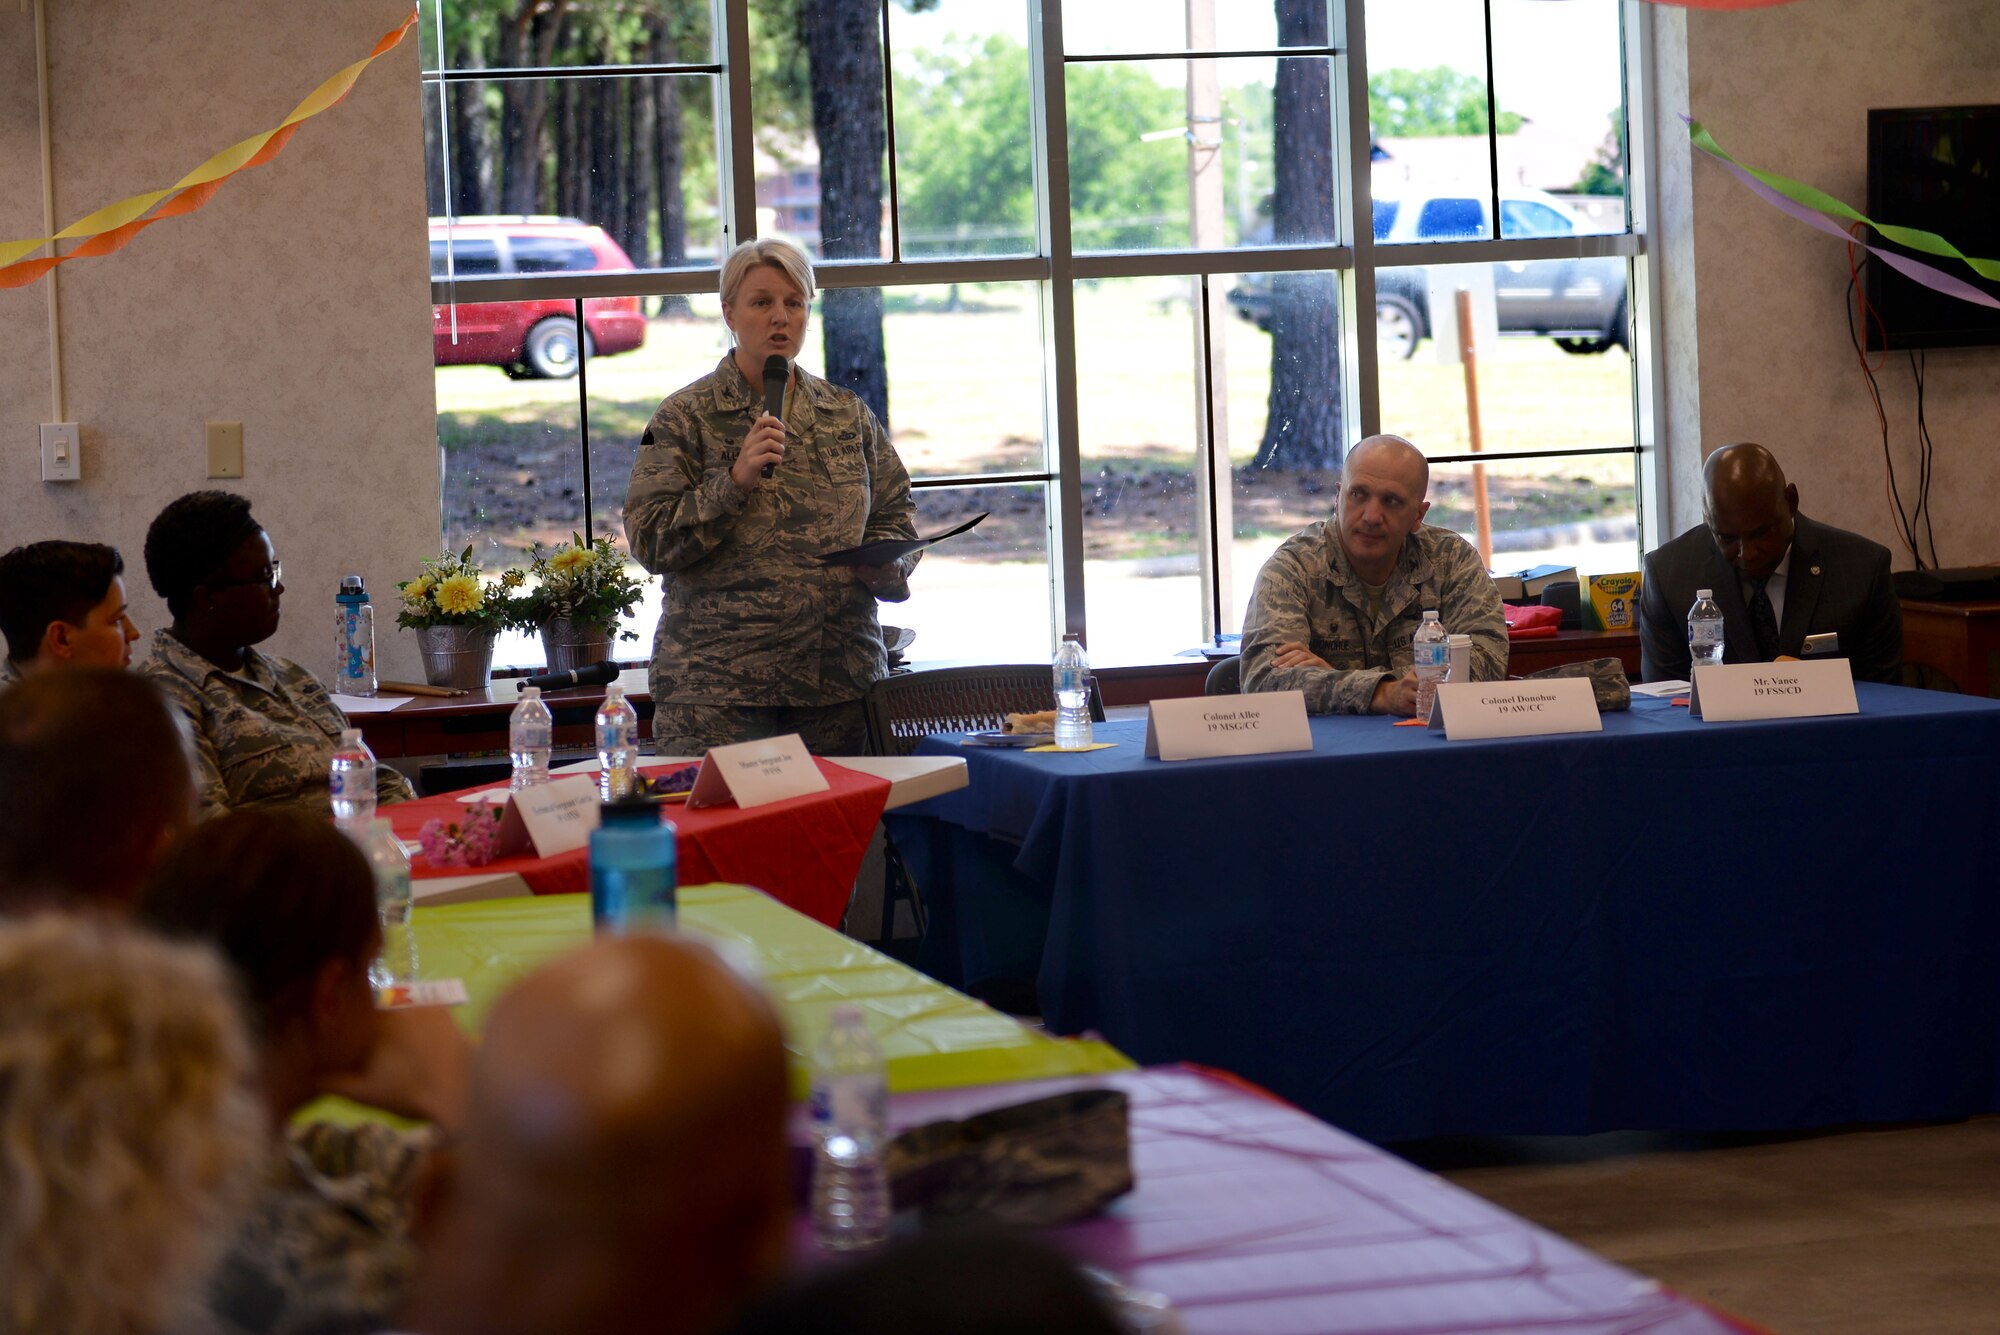 A woman wearing the Airman Battle Uniform speaks into a microphone into a circle of people also wearing the Airman Battle Uniform. They are sitting around tables with table cloths that are each a different color of the rainbow.